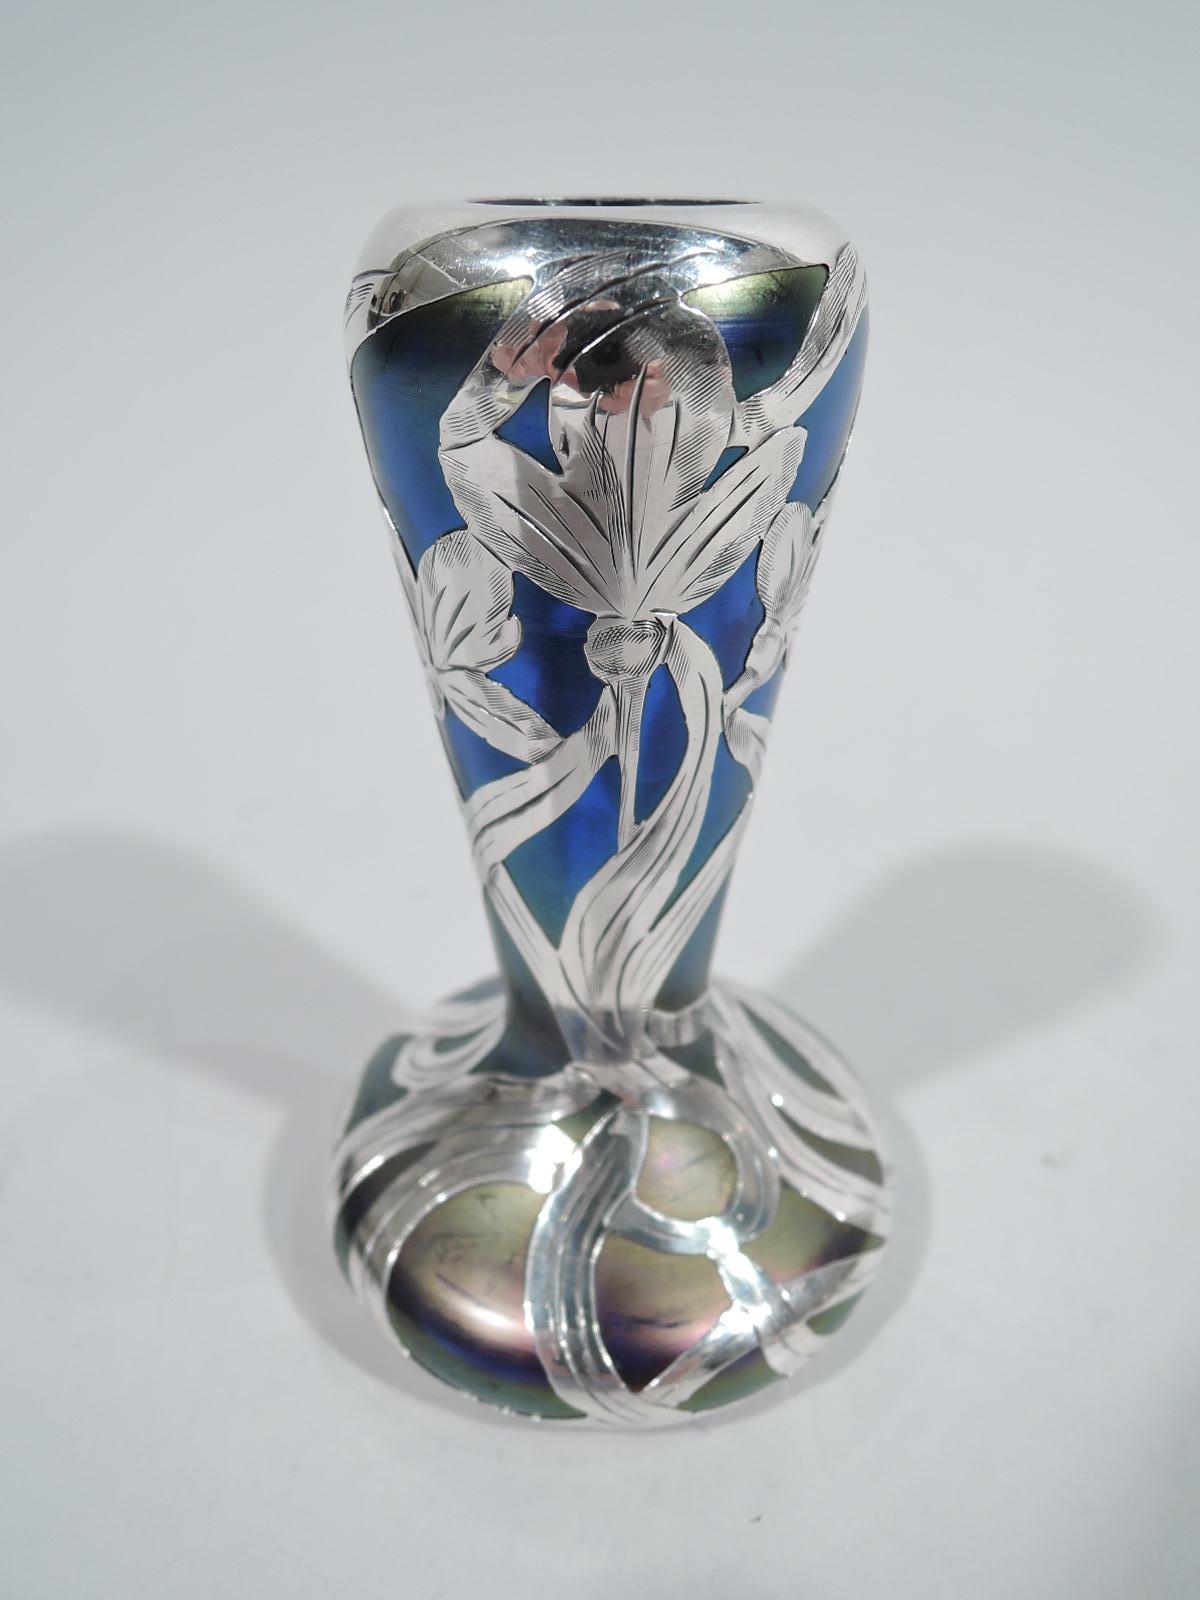 Turn-of-the-century Austrian Art Nouveau glass vase with engraved silver overlay. Tapering neck with curved shoulder and round inset mouth, and bellied base. Overlay in form of stem flowers with whiplash and interlaced tendrils. Glass iridescent in